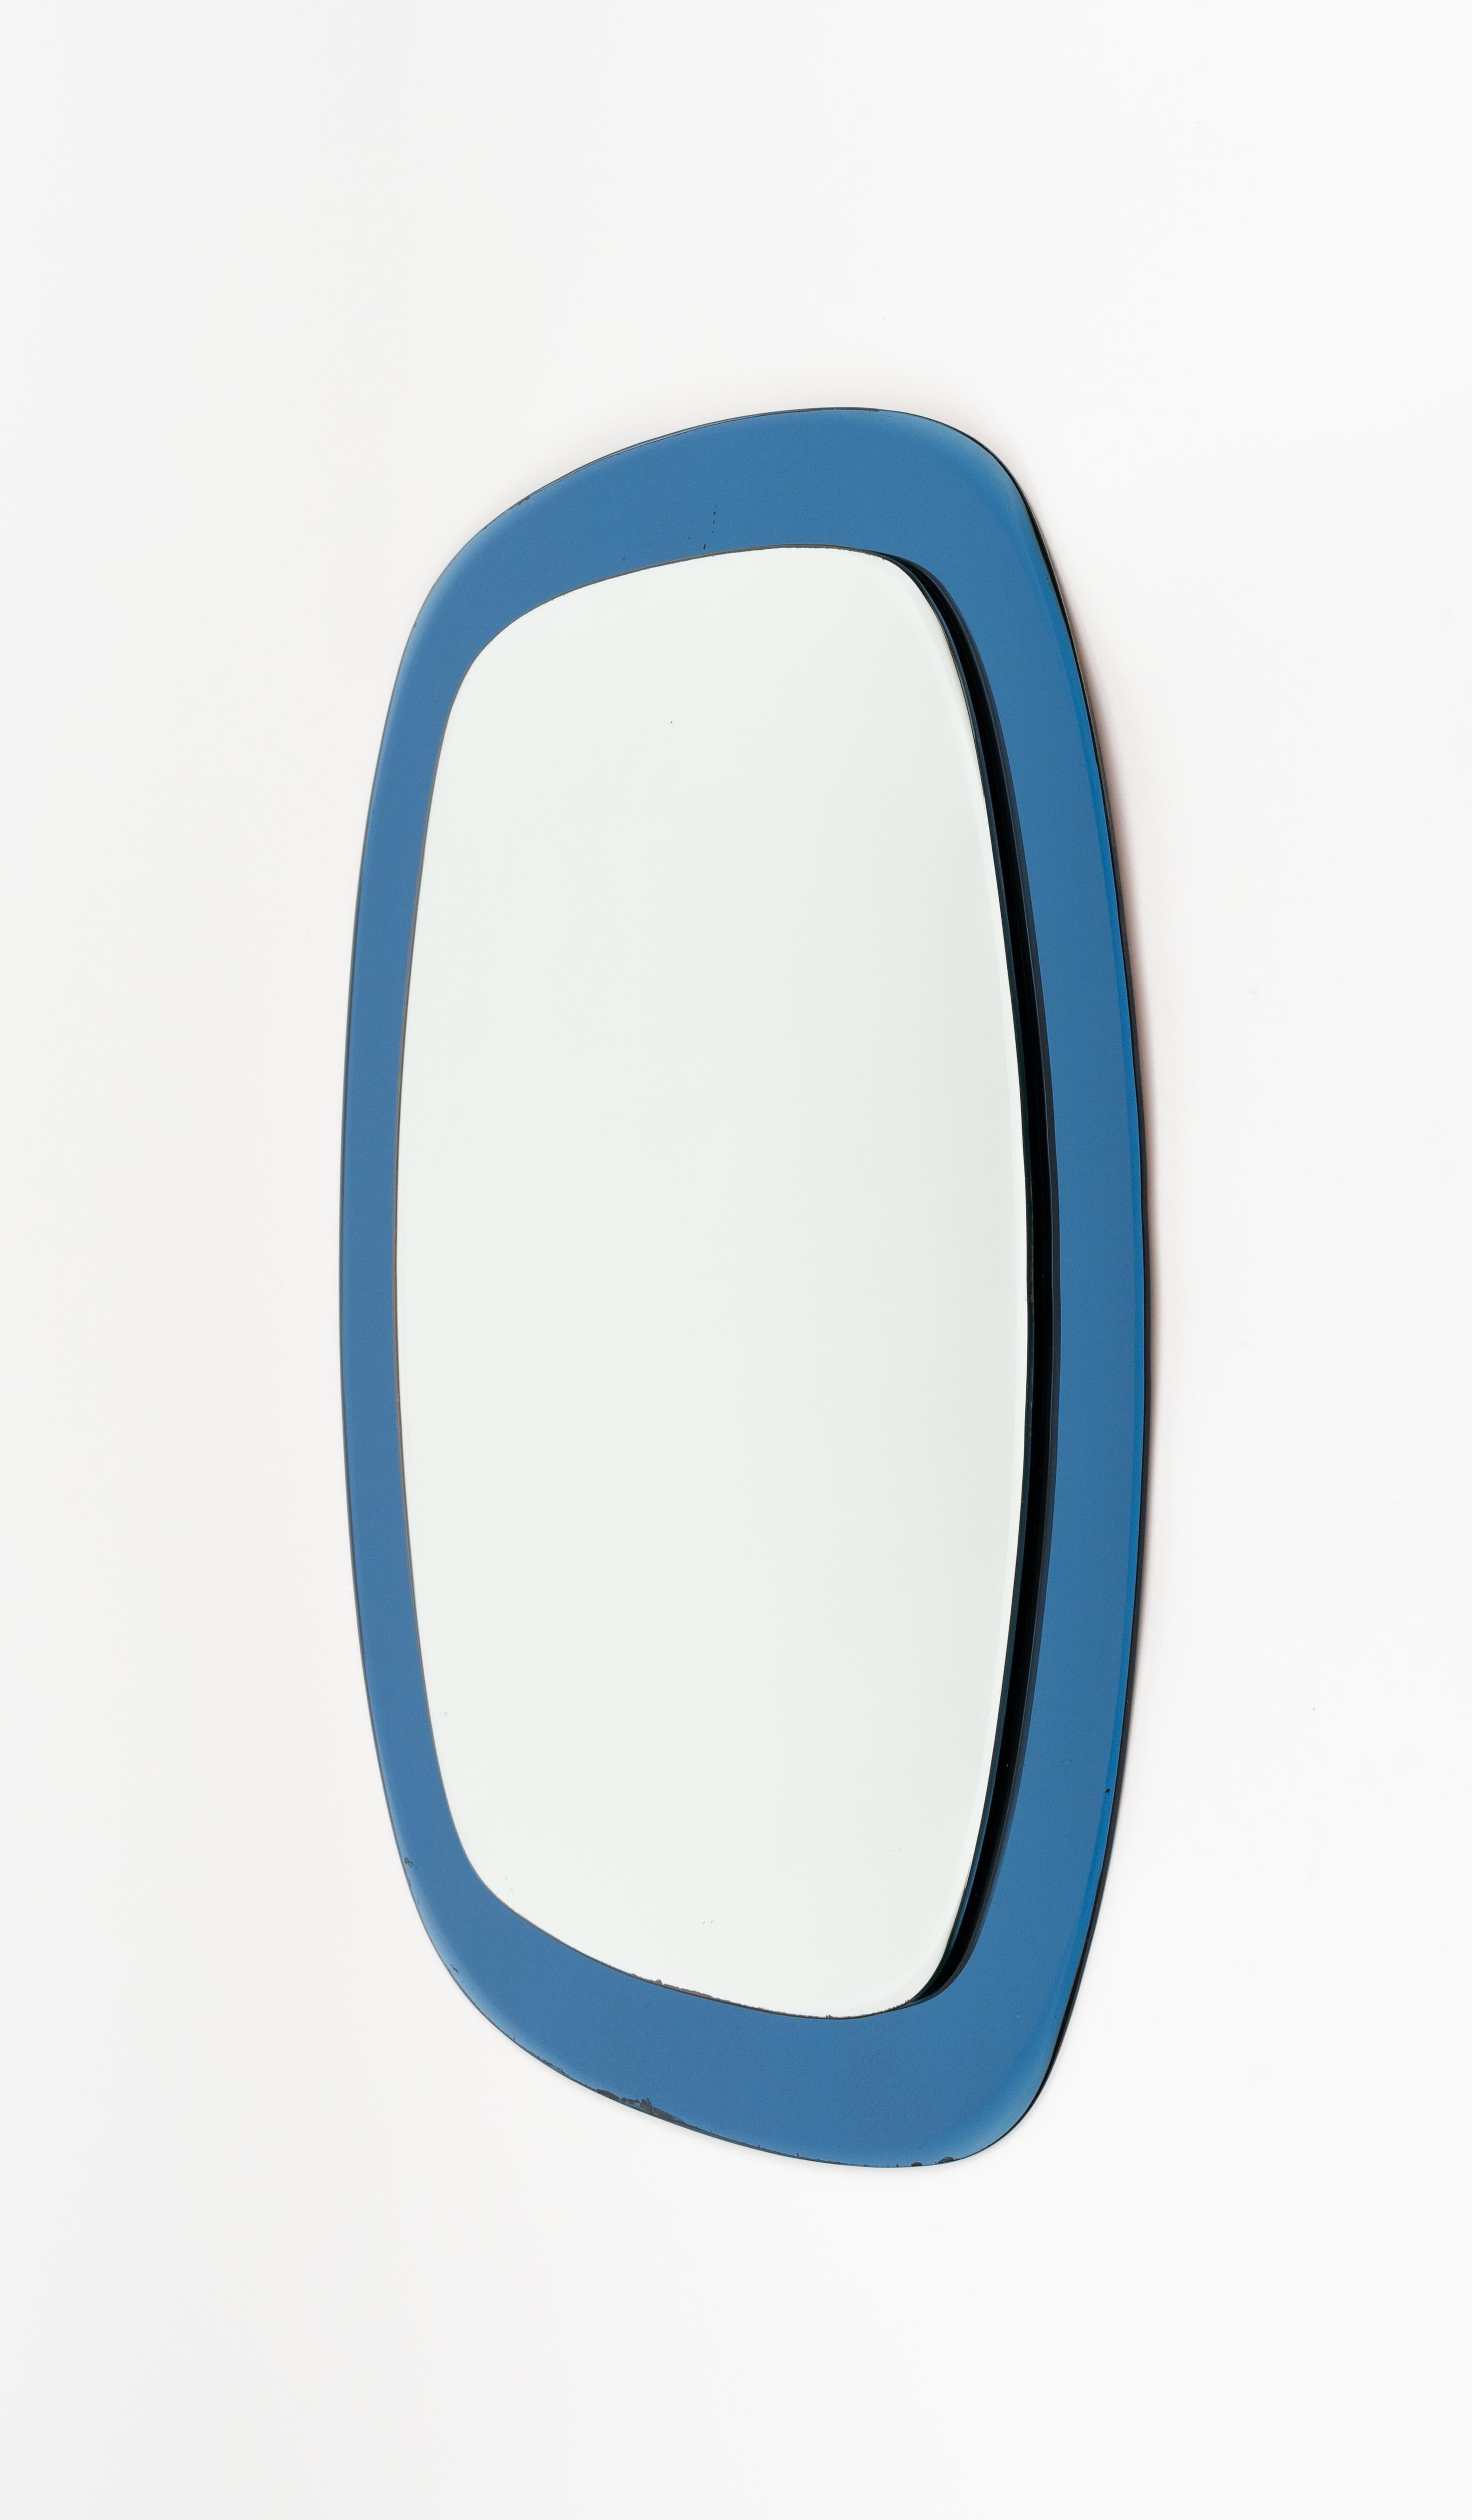 Mid-20th Century Midcentury Cristal Art Oval Wall Mirror with Blue Frame, Italy 1960s For Sale